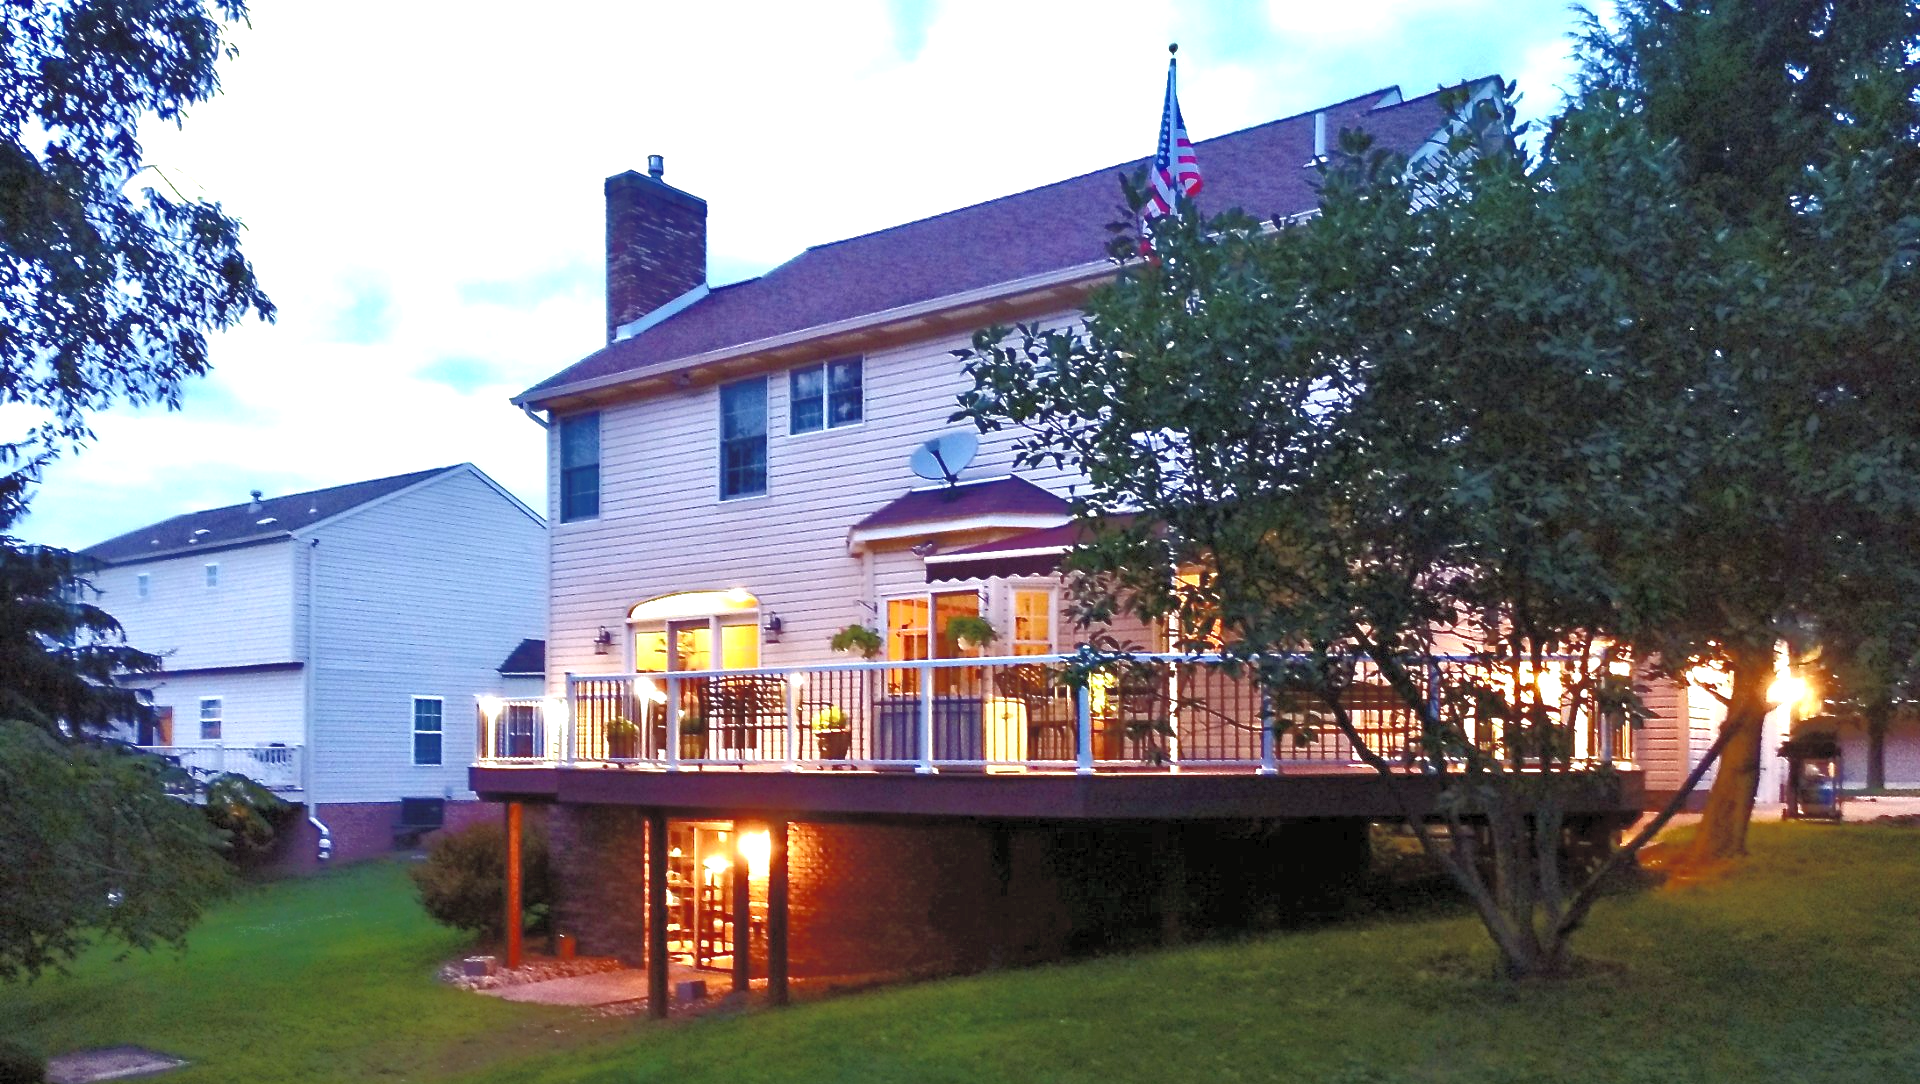 A house with a large deck is lit up at night